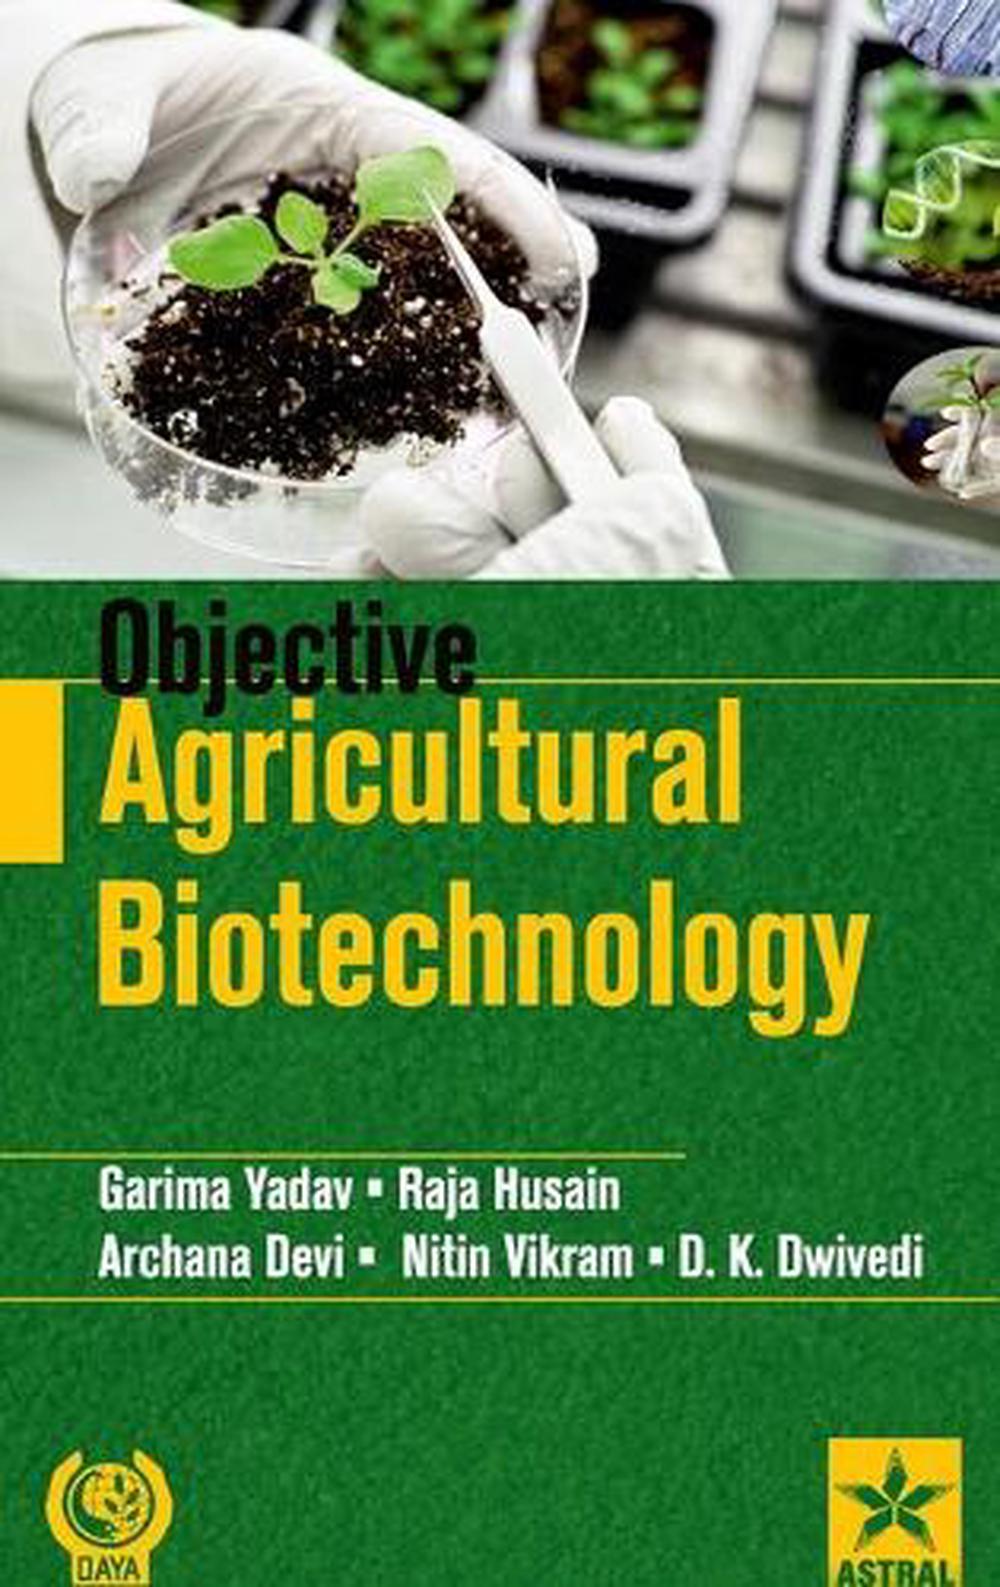 Objective Agricultural Biotechnology by Garima Yadav Hardcover Book